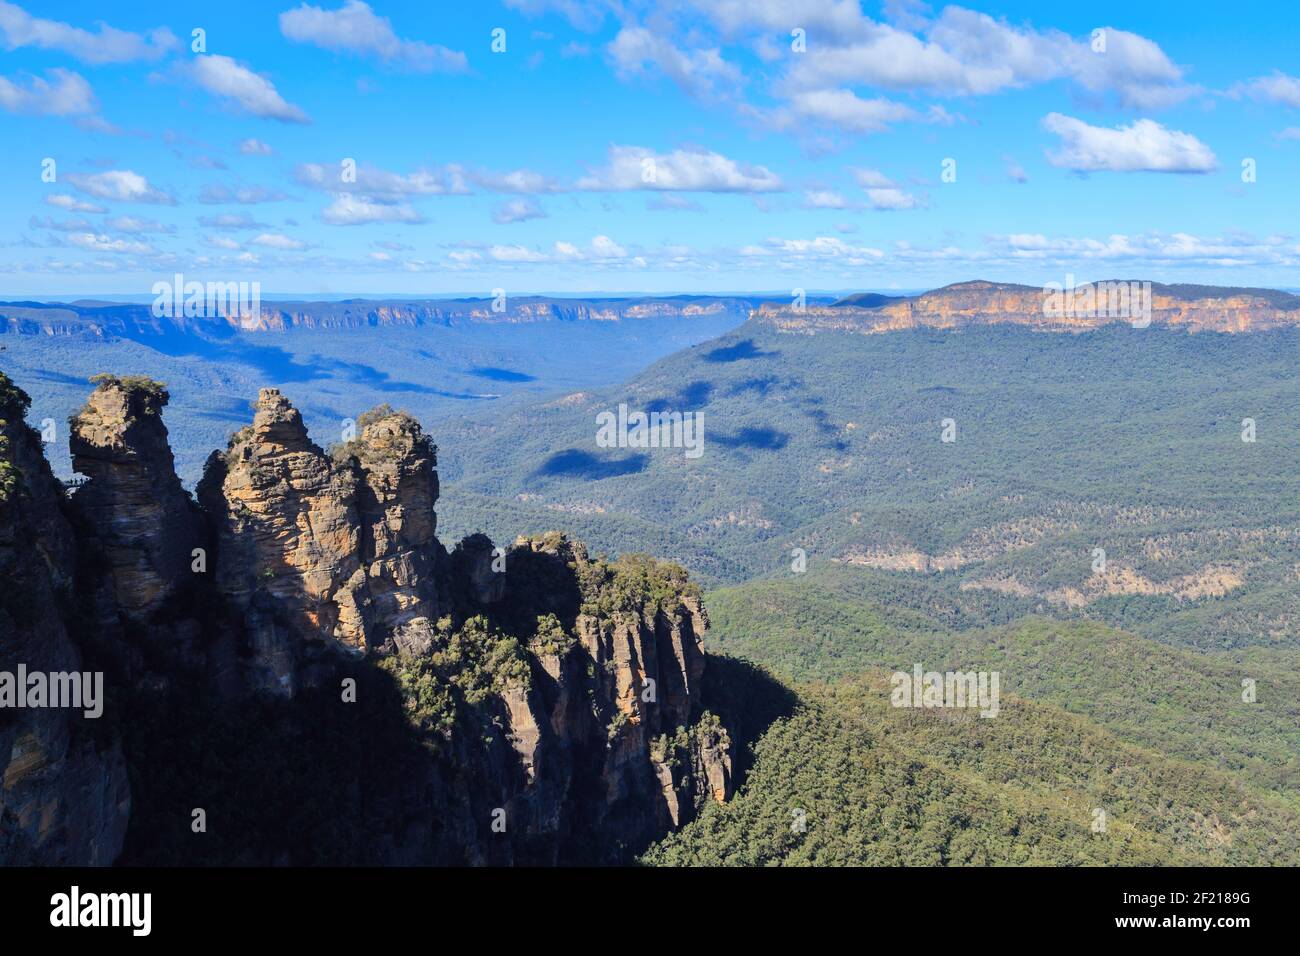 The Blue Mountains, New South Wales, Australia. In the foreground is the famous "Three Sisters" rock formation Stock Photo